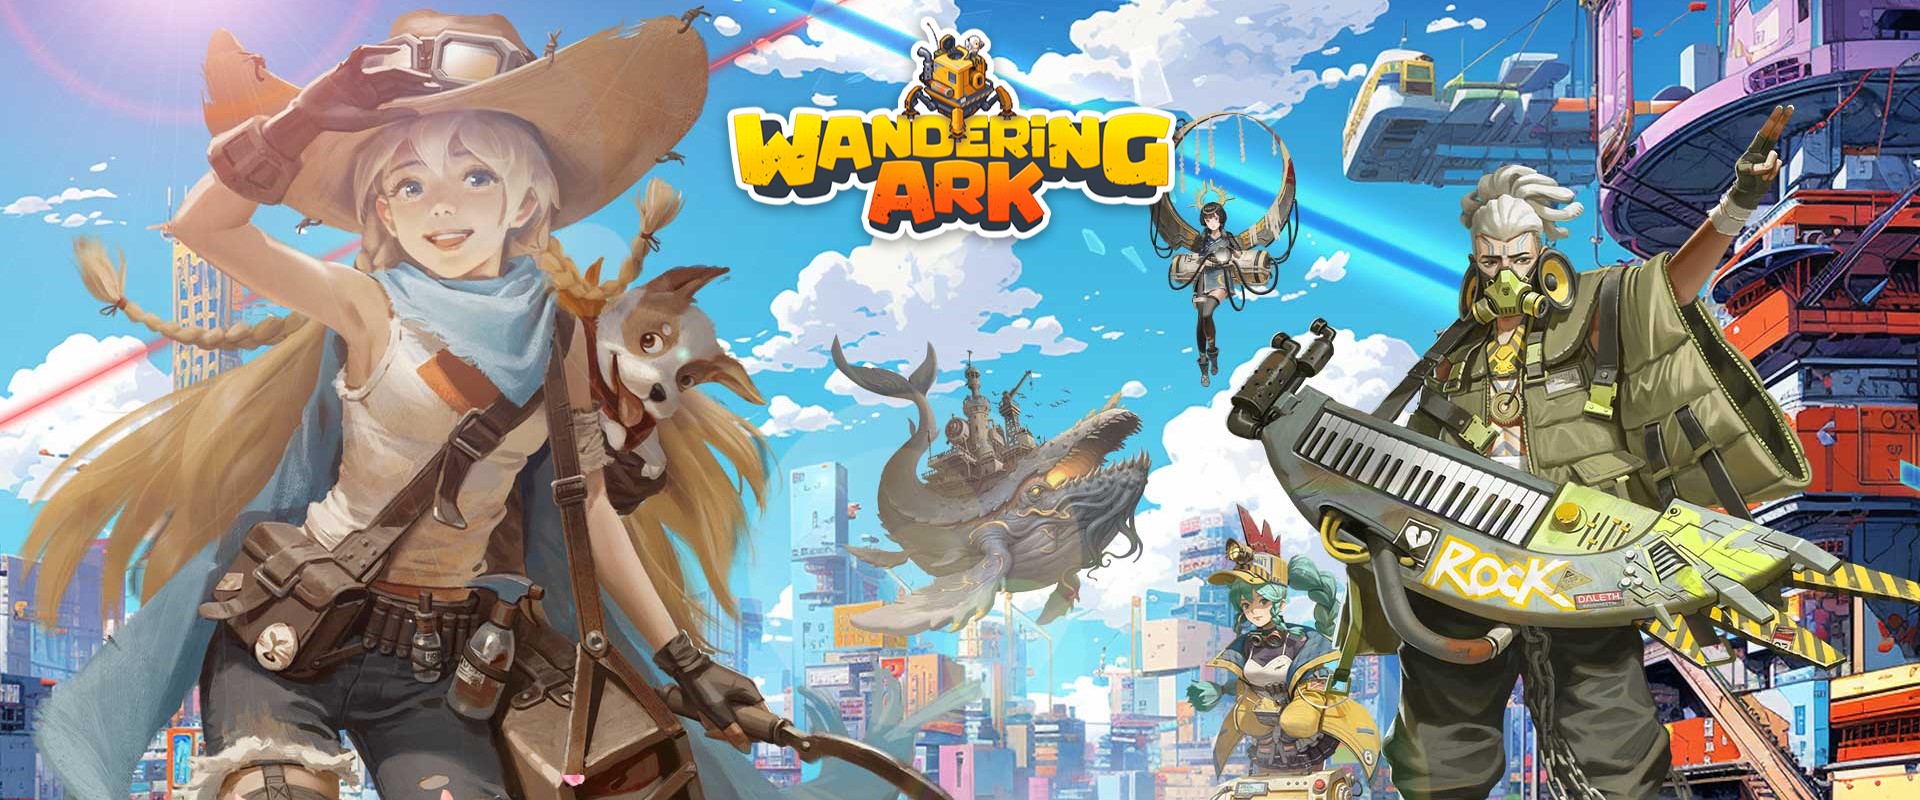 Download & Play Wandering Ark Playpark on PC & Mac with NoxPlayer (Emulator)